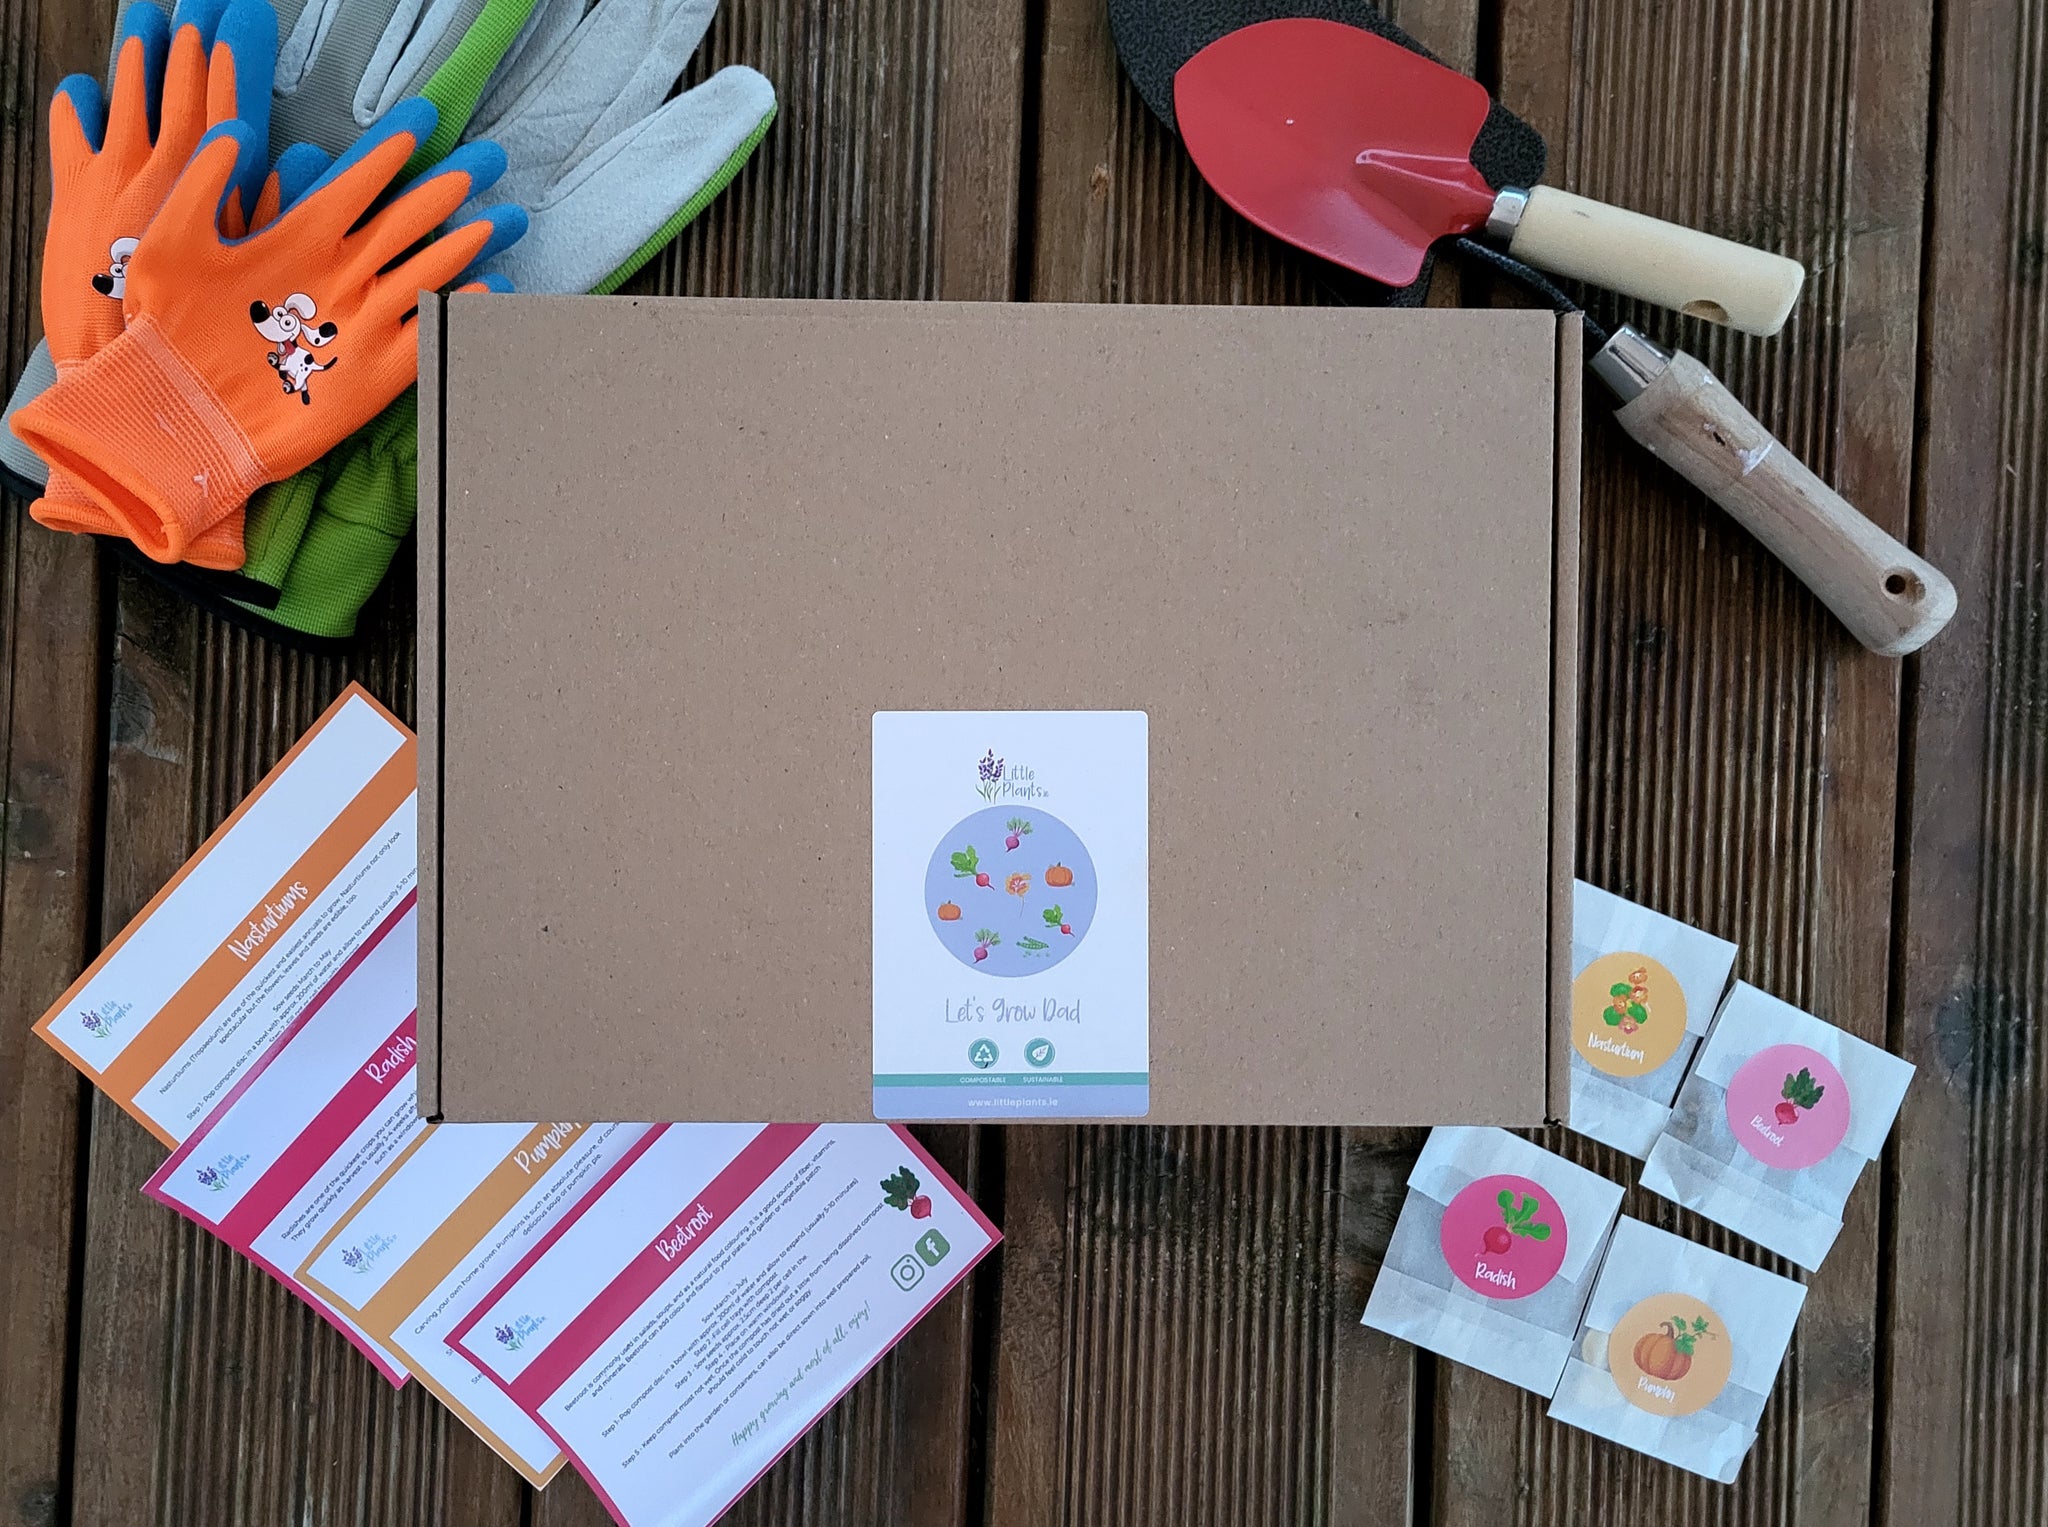 Let's Grow Grandad Father's day seed kit with gloves and trowel for Grandad's and Littleones